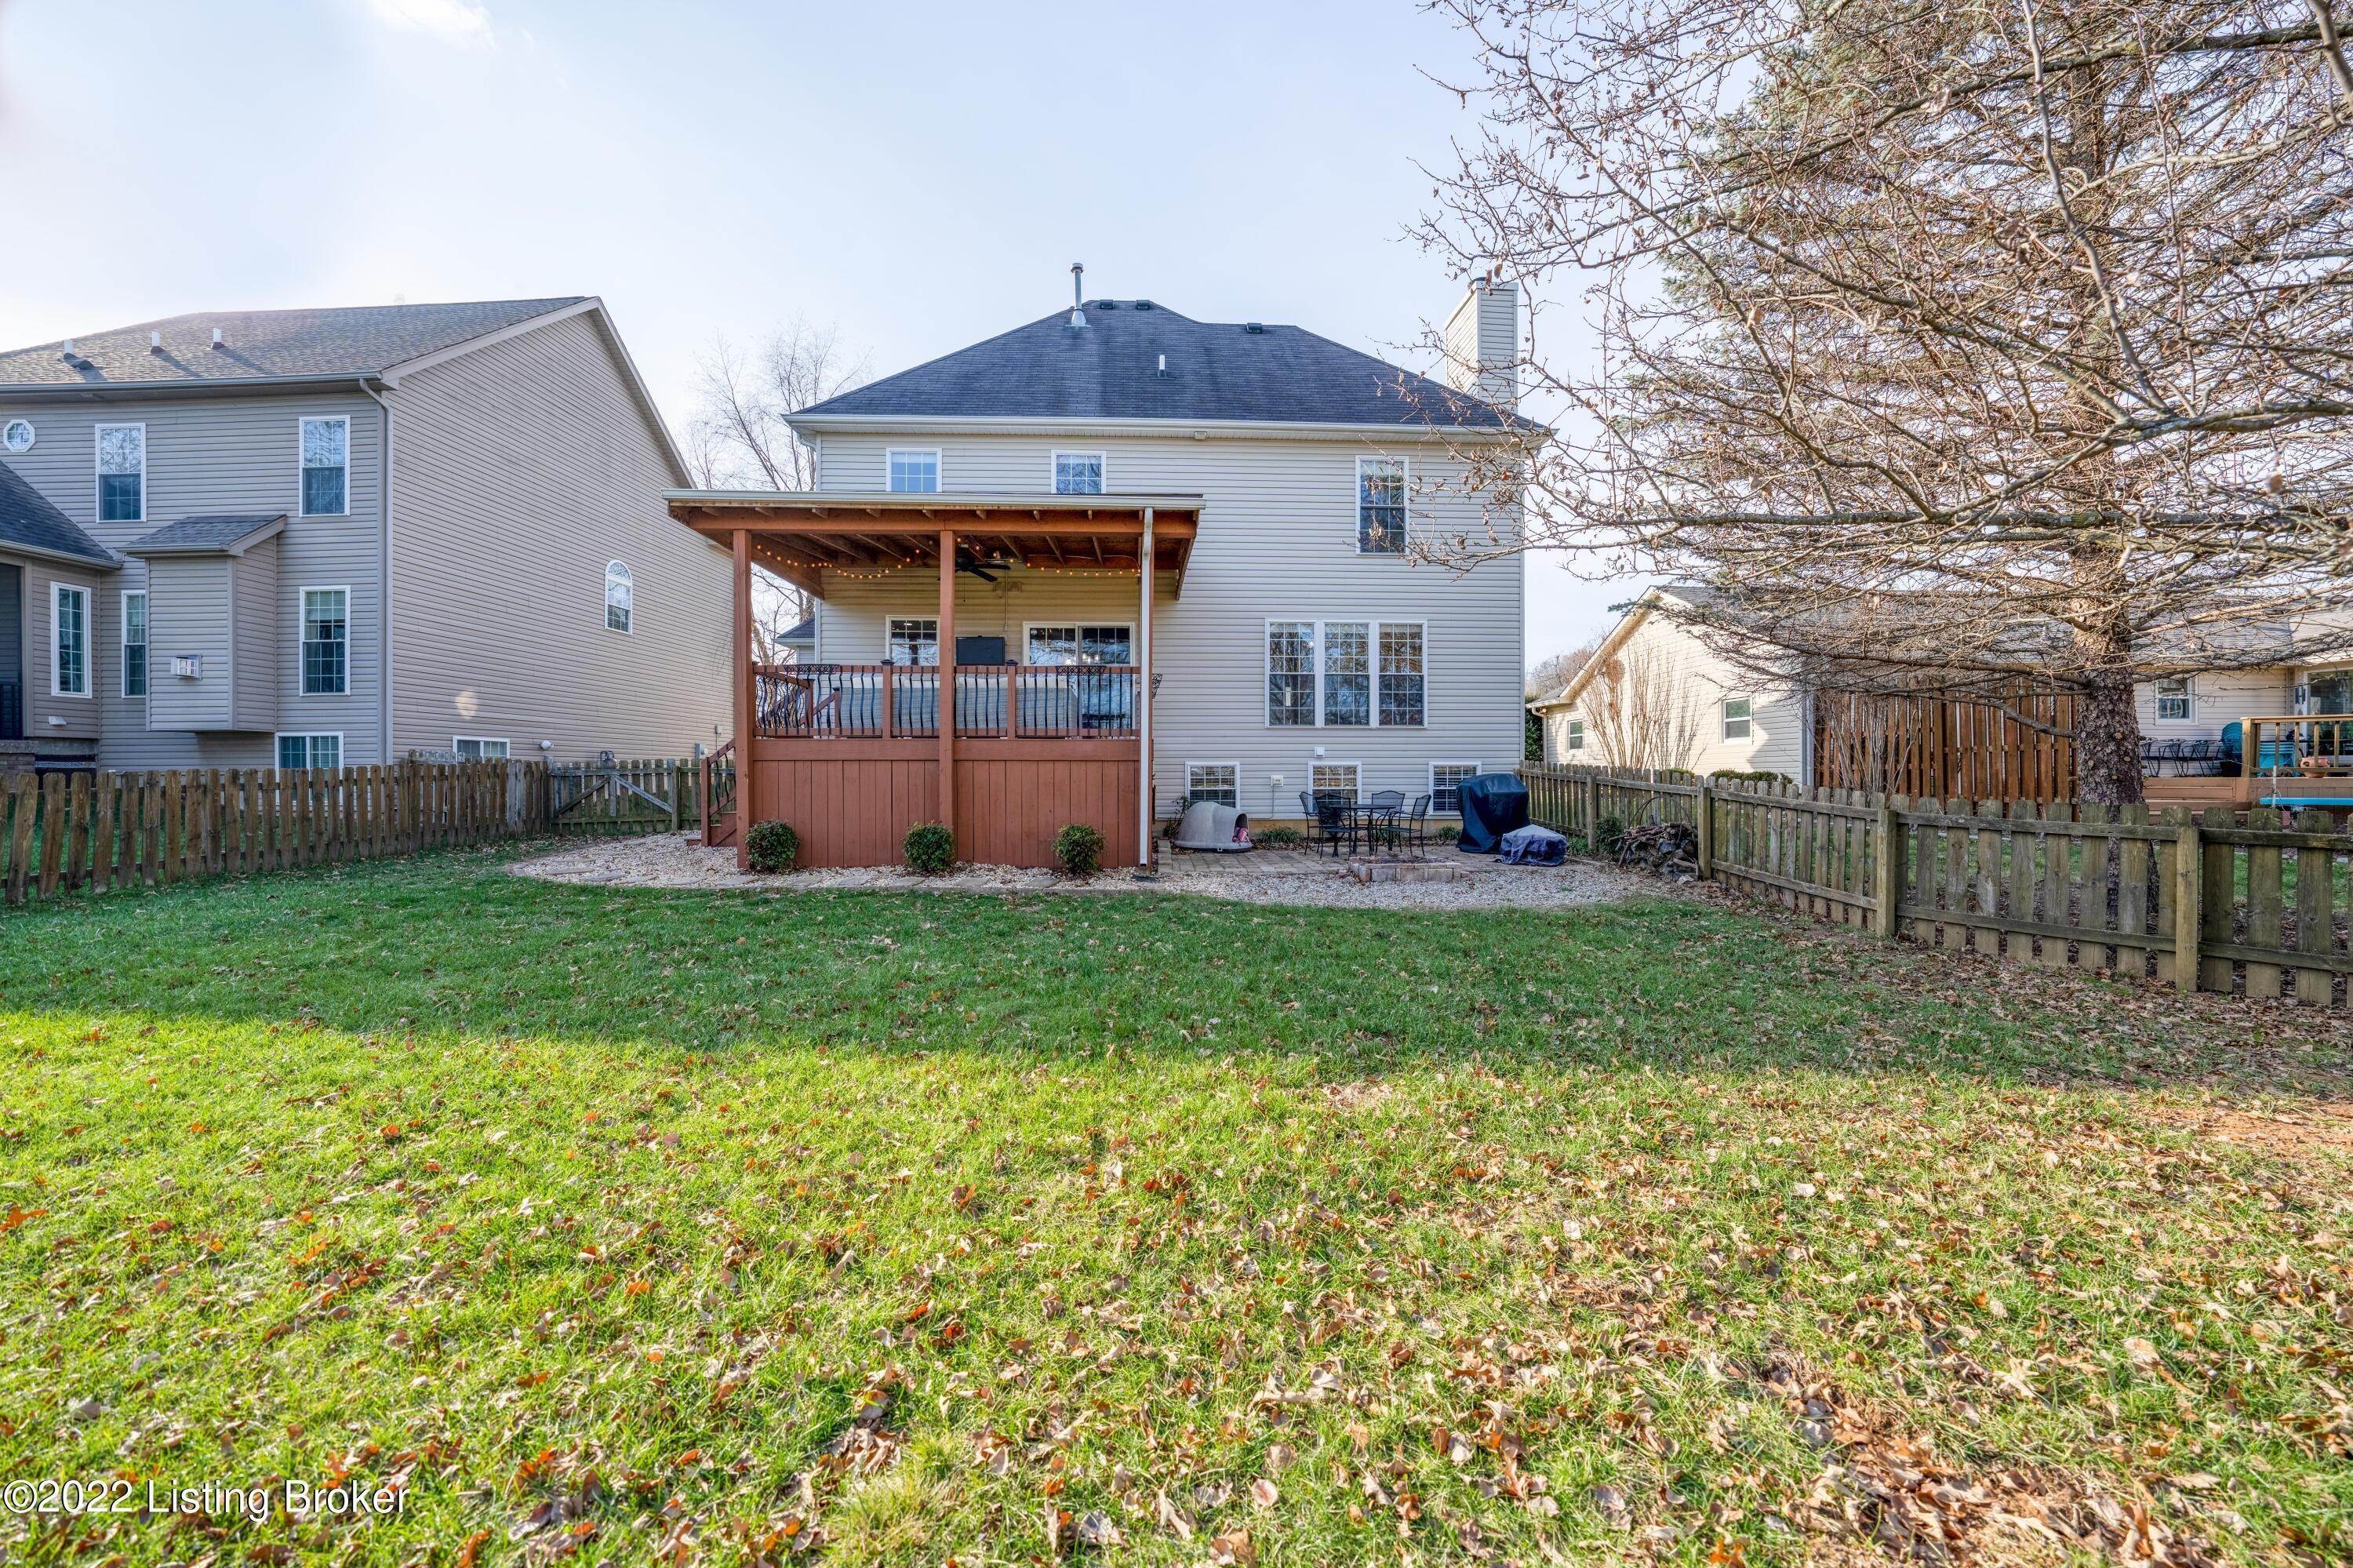 42. Single Family at Louisville, KY 40299